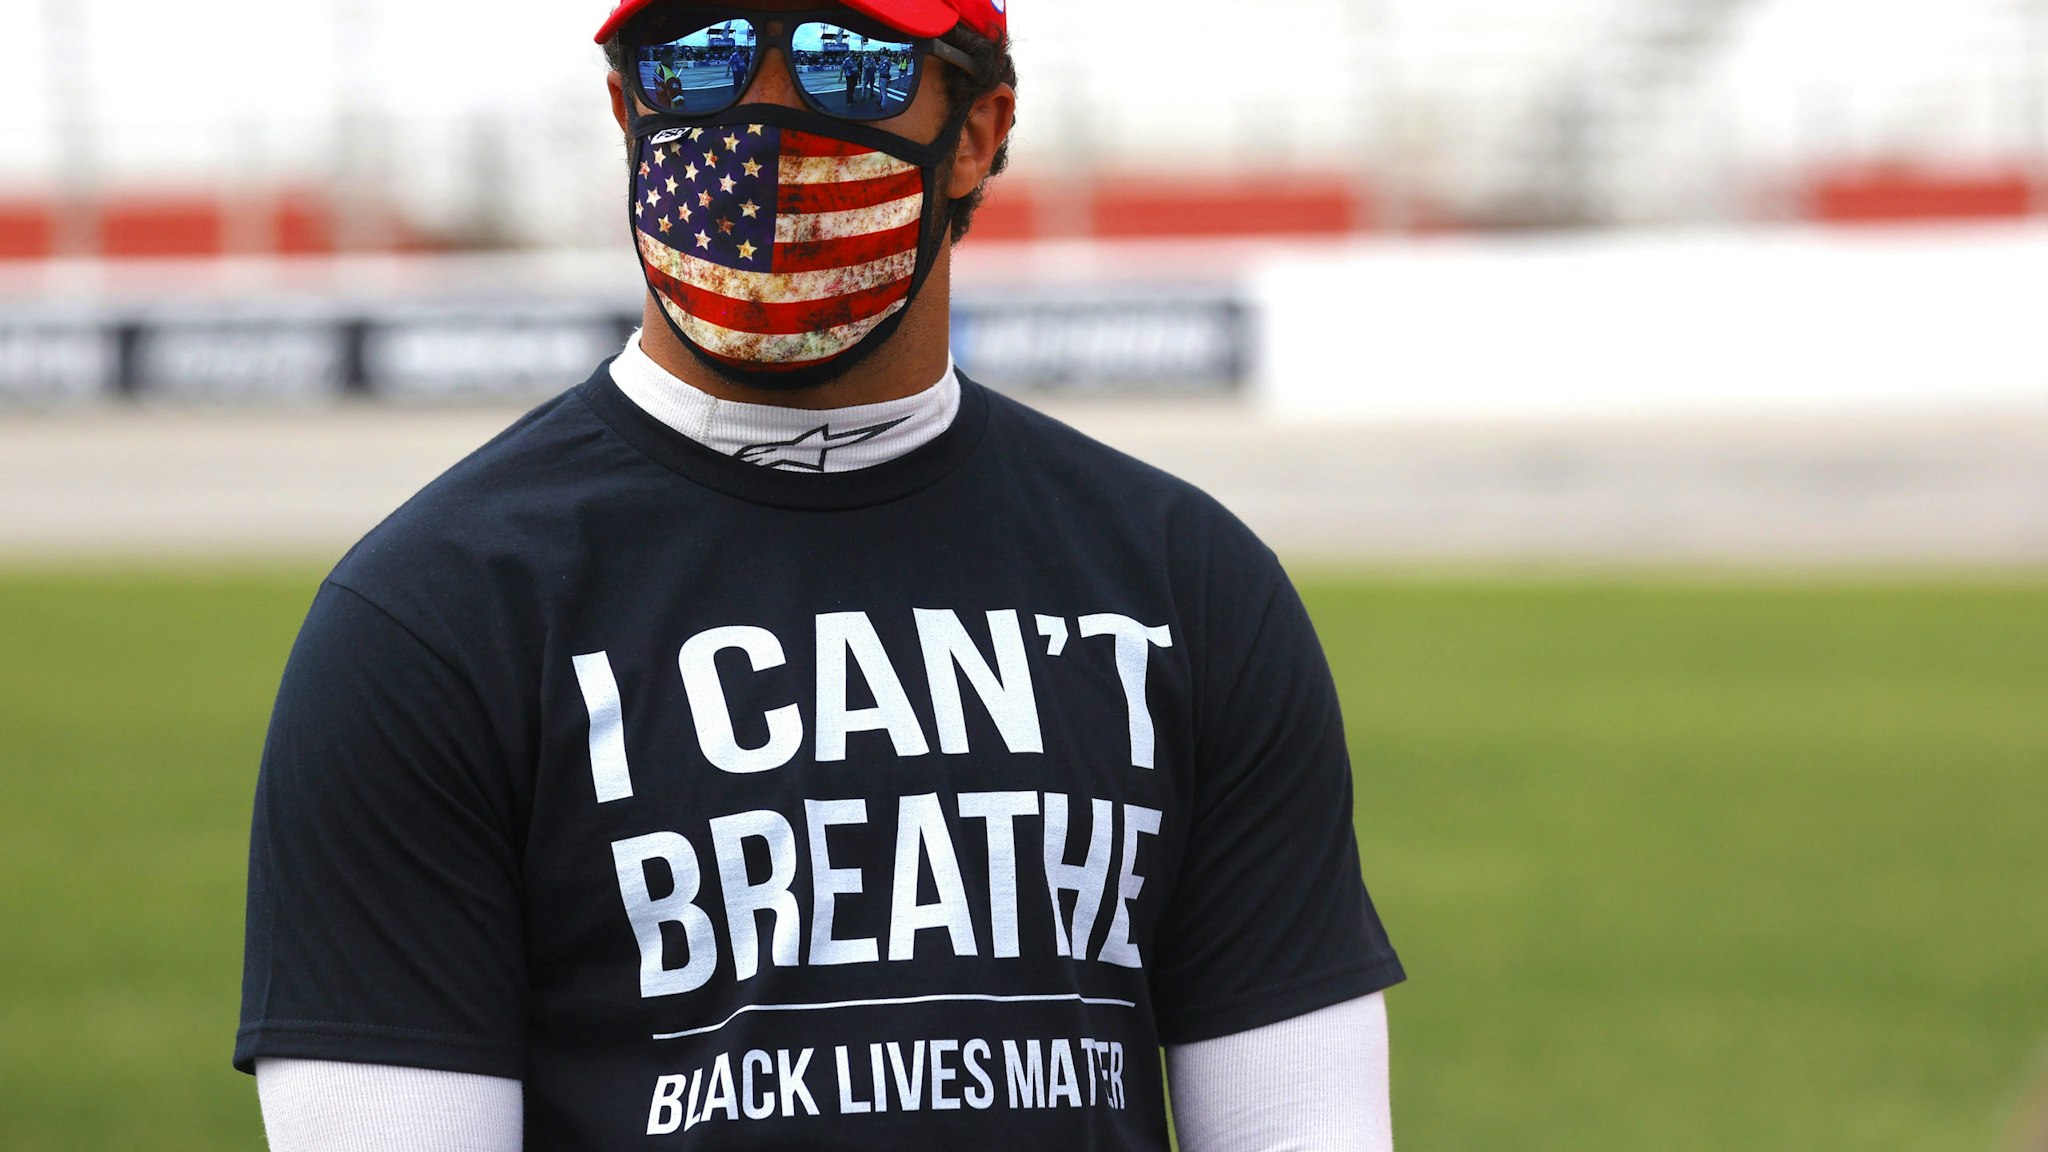 HAMPTON, GEORGIA - JUNE 07: Bubba Wallace, driver of the #43 McDonald's Chevrolet, wears a "I Can't Breathe - Black Lives Matter" T-shirt under his fire suit in solidarity with protesters around the world taking to the streets after the death of George Floyd on May 25 while in the custody of Minneapolis, Minnesota police stands on the grid prior to the NASCAR Cup Series Folds of Honor QuikTrip 500 at Atlanta Motor Speedway on June 07, 2020 in Hampton, Georgia.